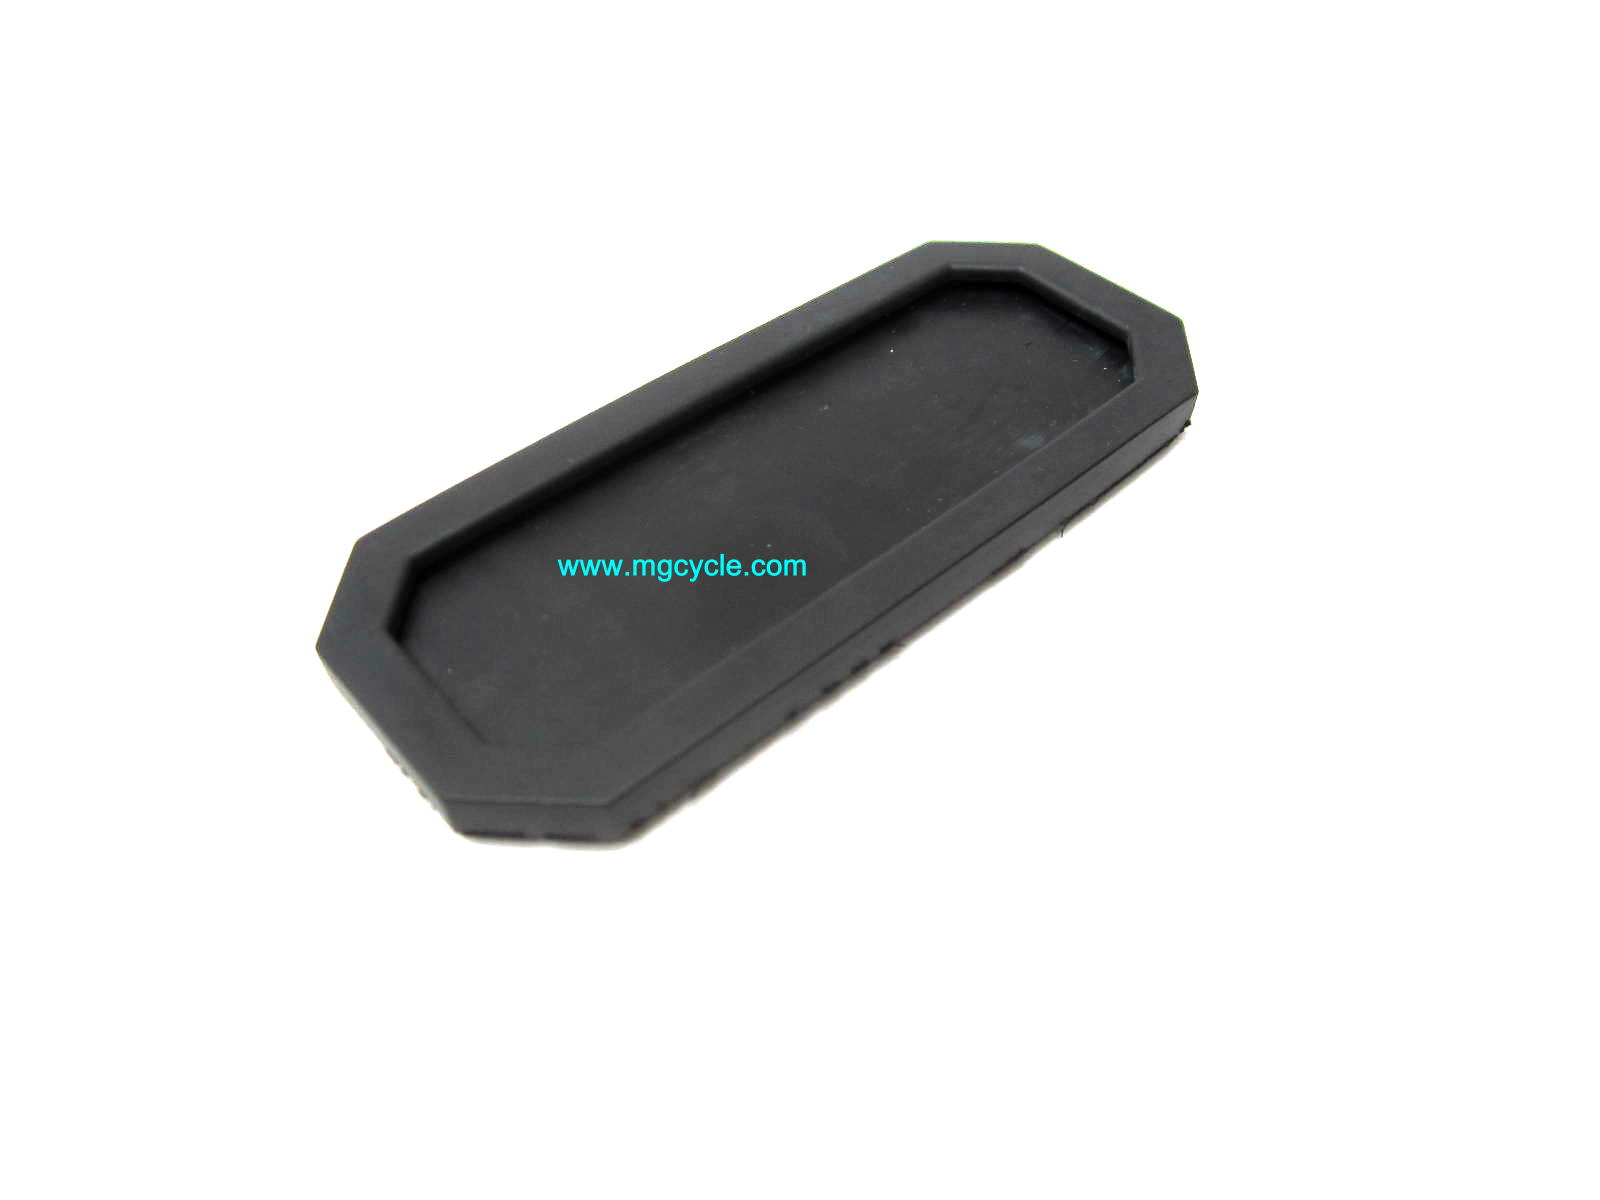 Replacement rubber knee pad GU18941750